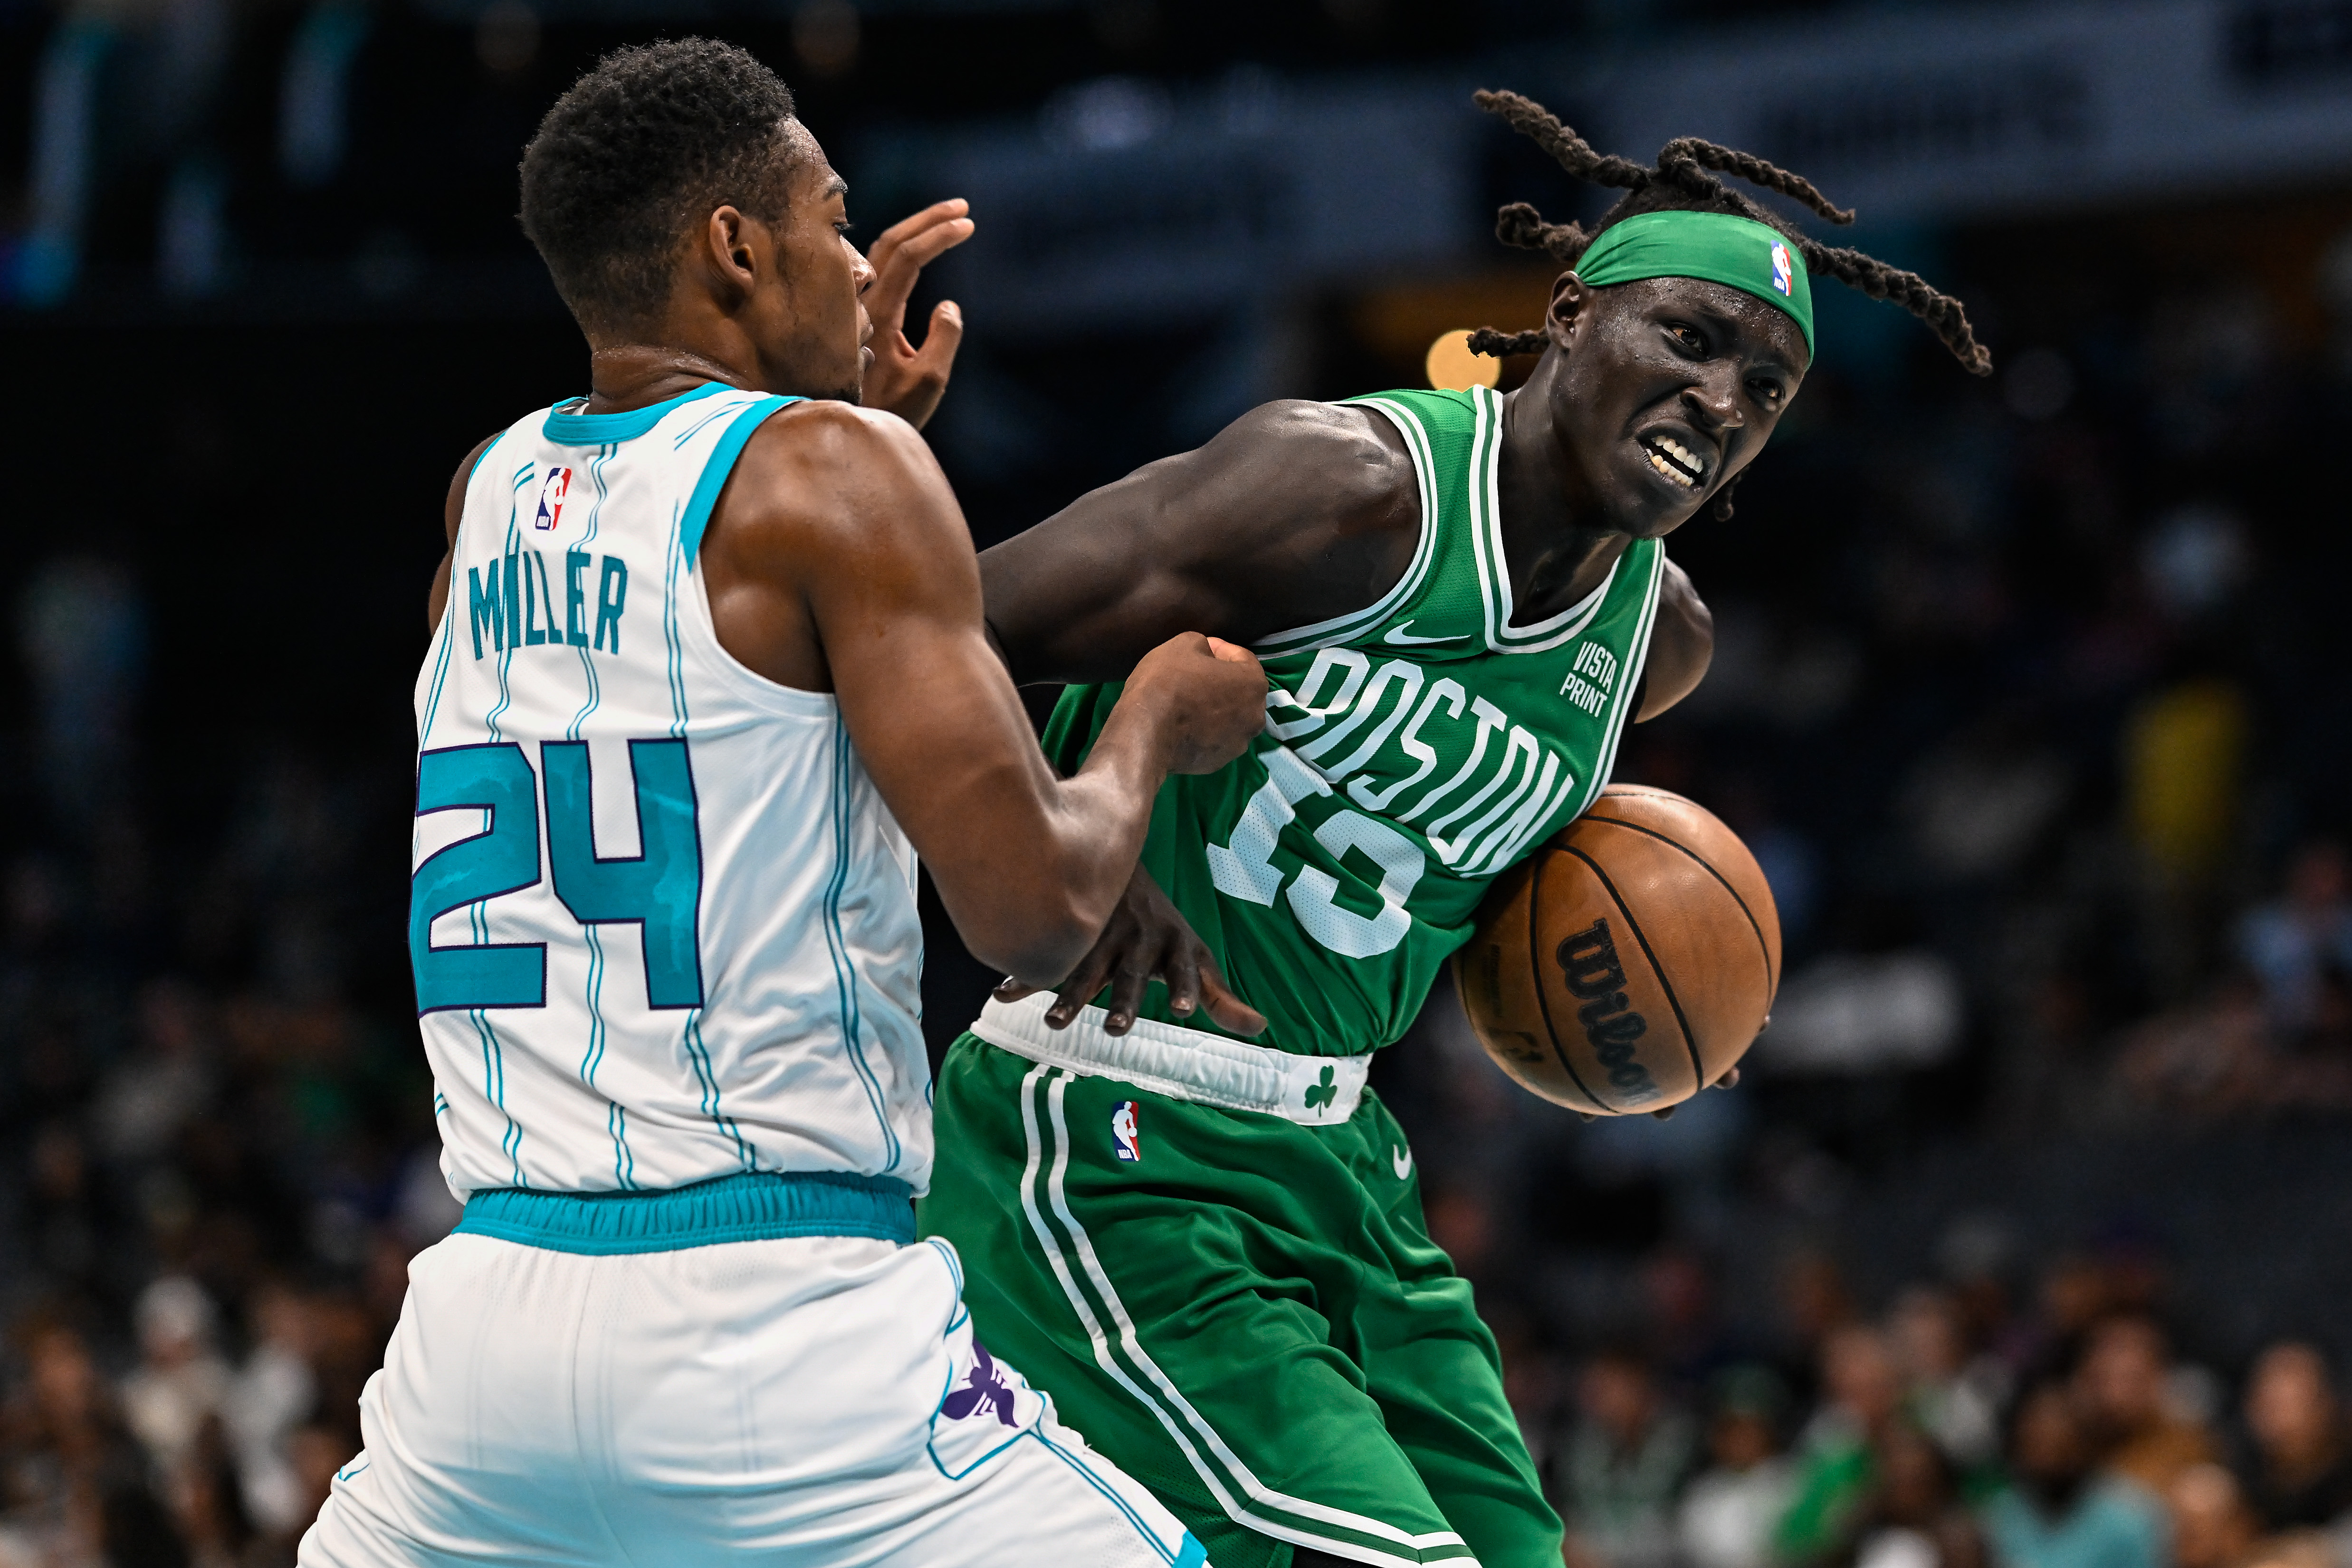 Man fumbled the bag so hard”, “Hitting up the ex never works out”, “How is  he out of the league already?” - Fans mock Dennis Schroder as he hints at  running it